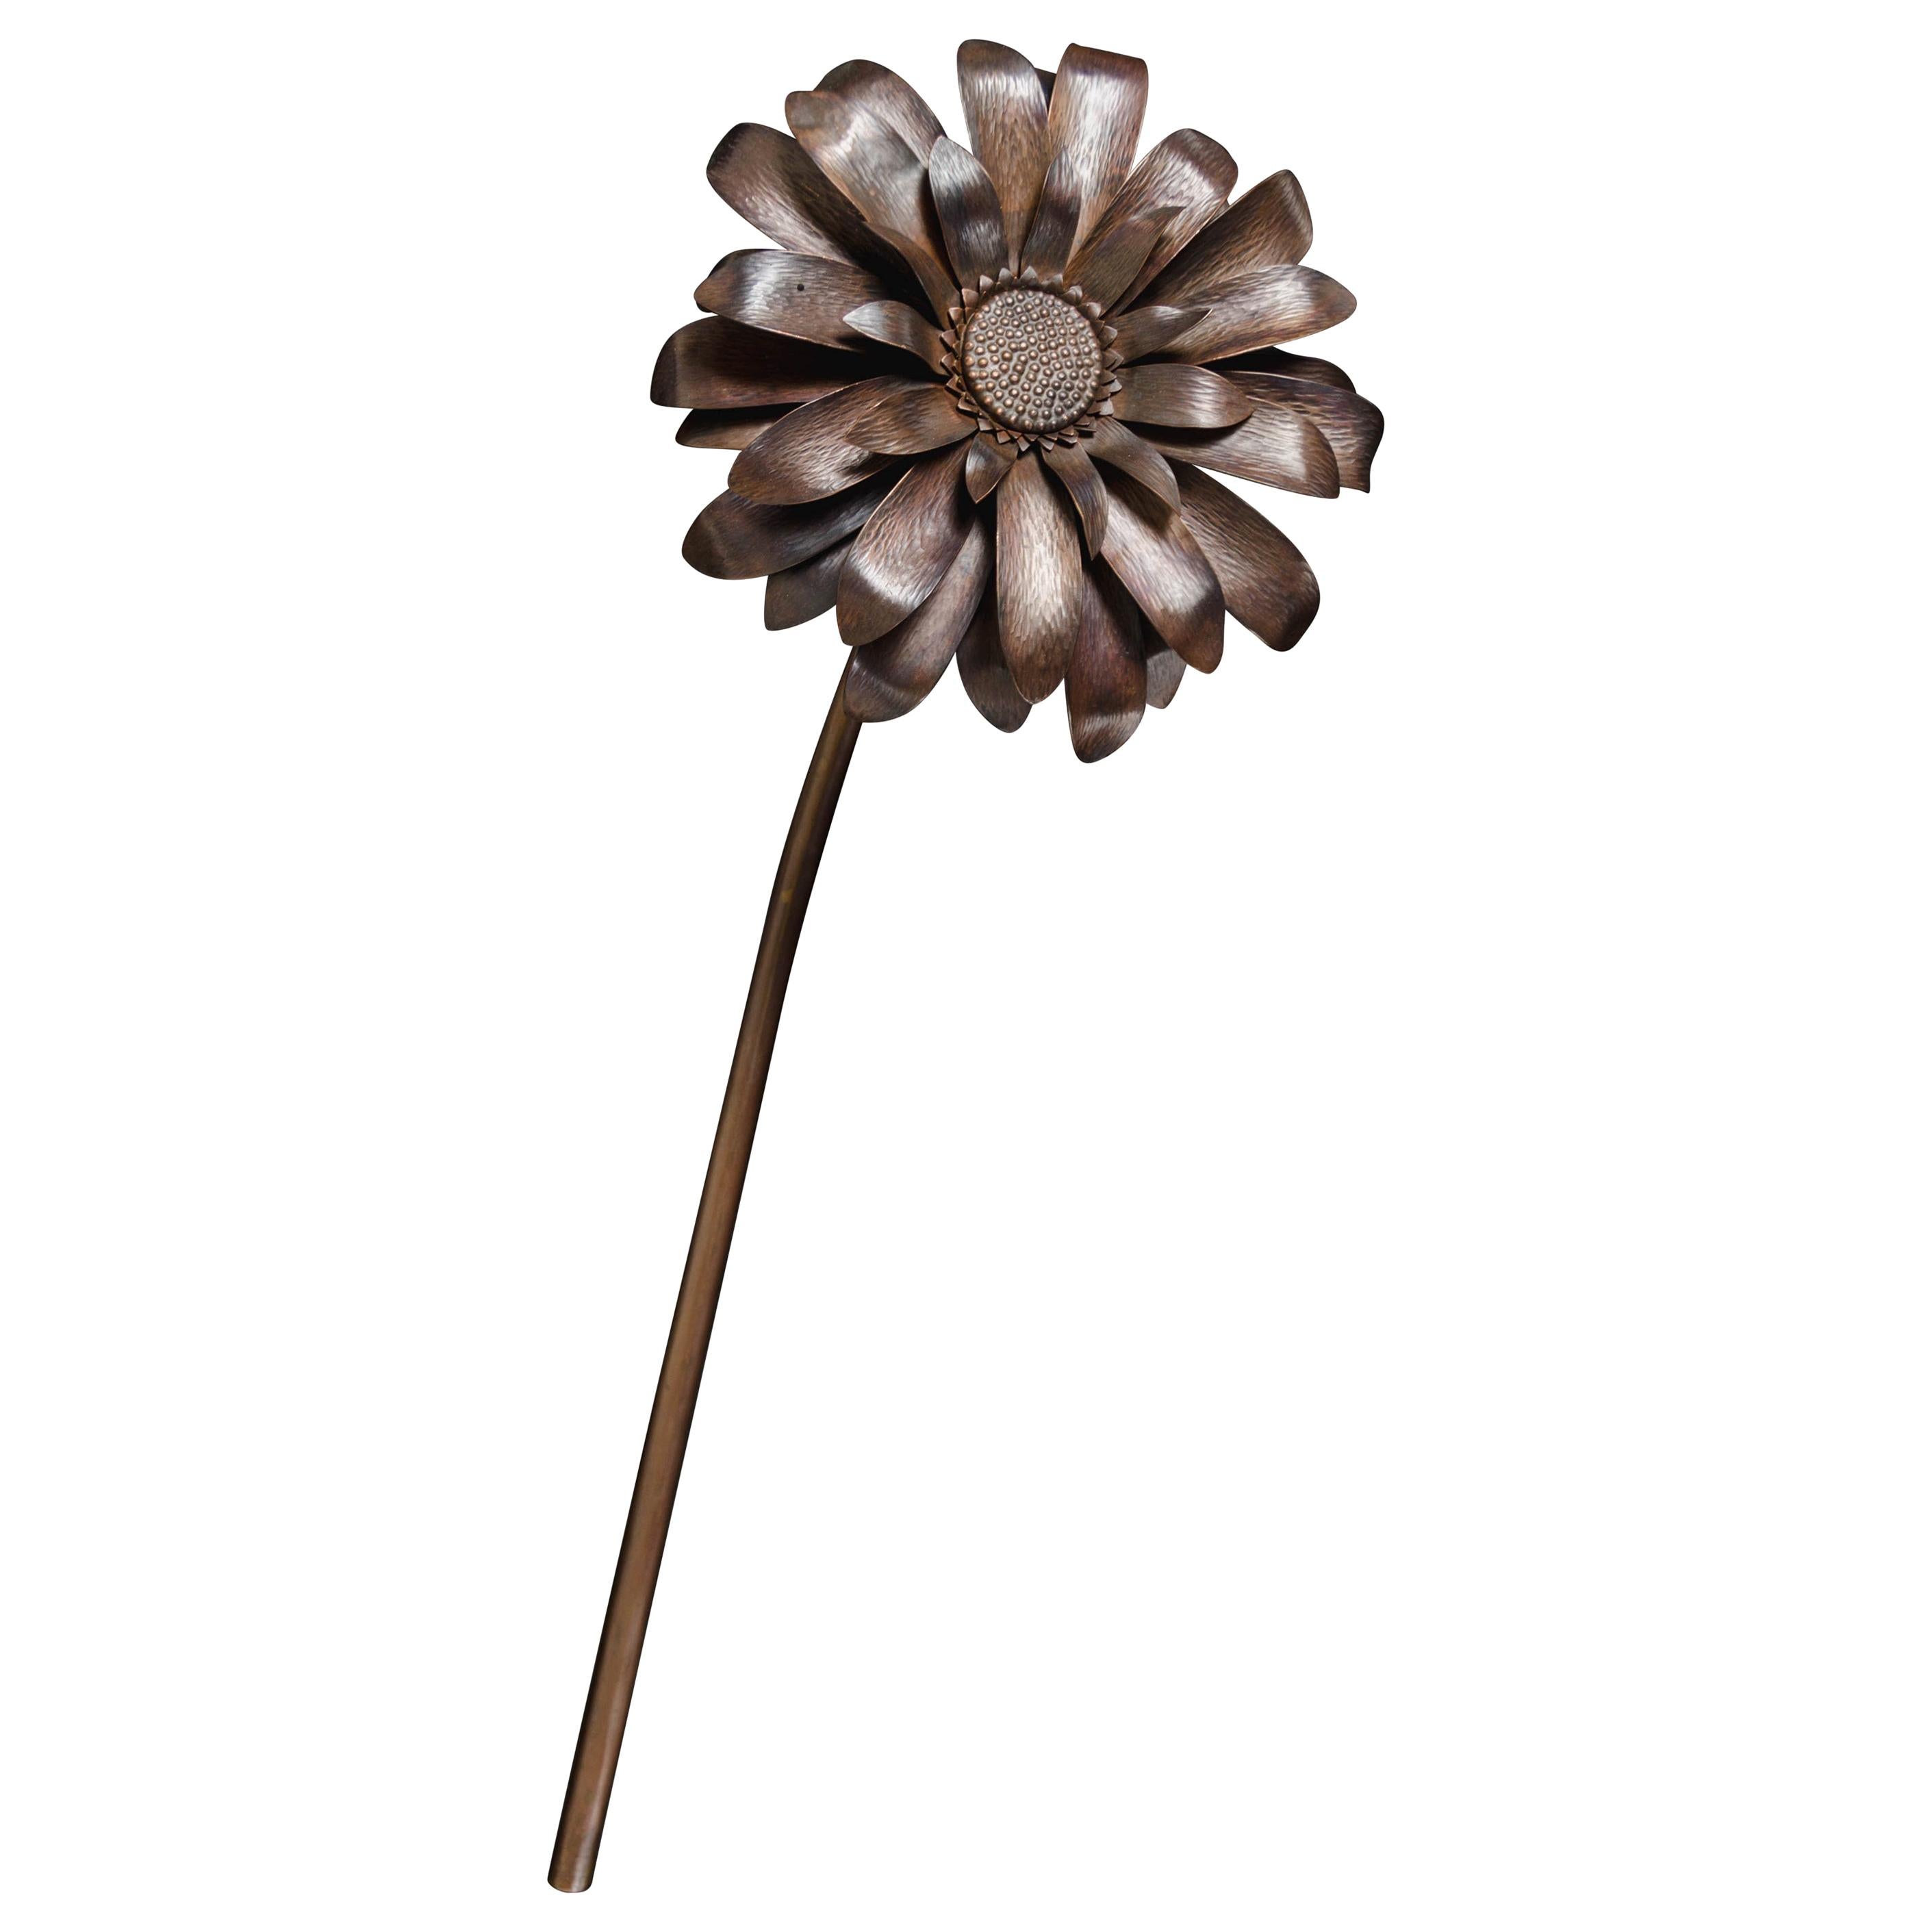 Gerber Daisy Flower Sculpture, Antique Copper by Robert Kuo, Hand Repousse For Sale